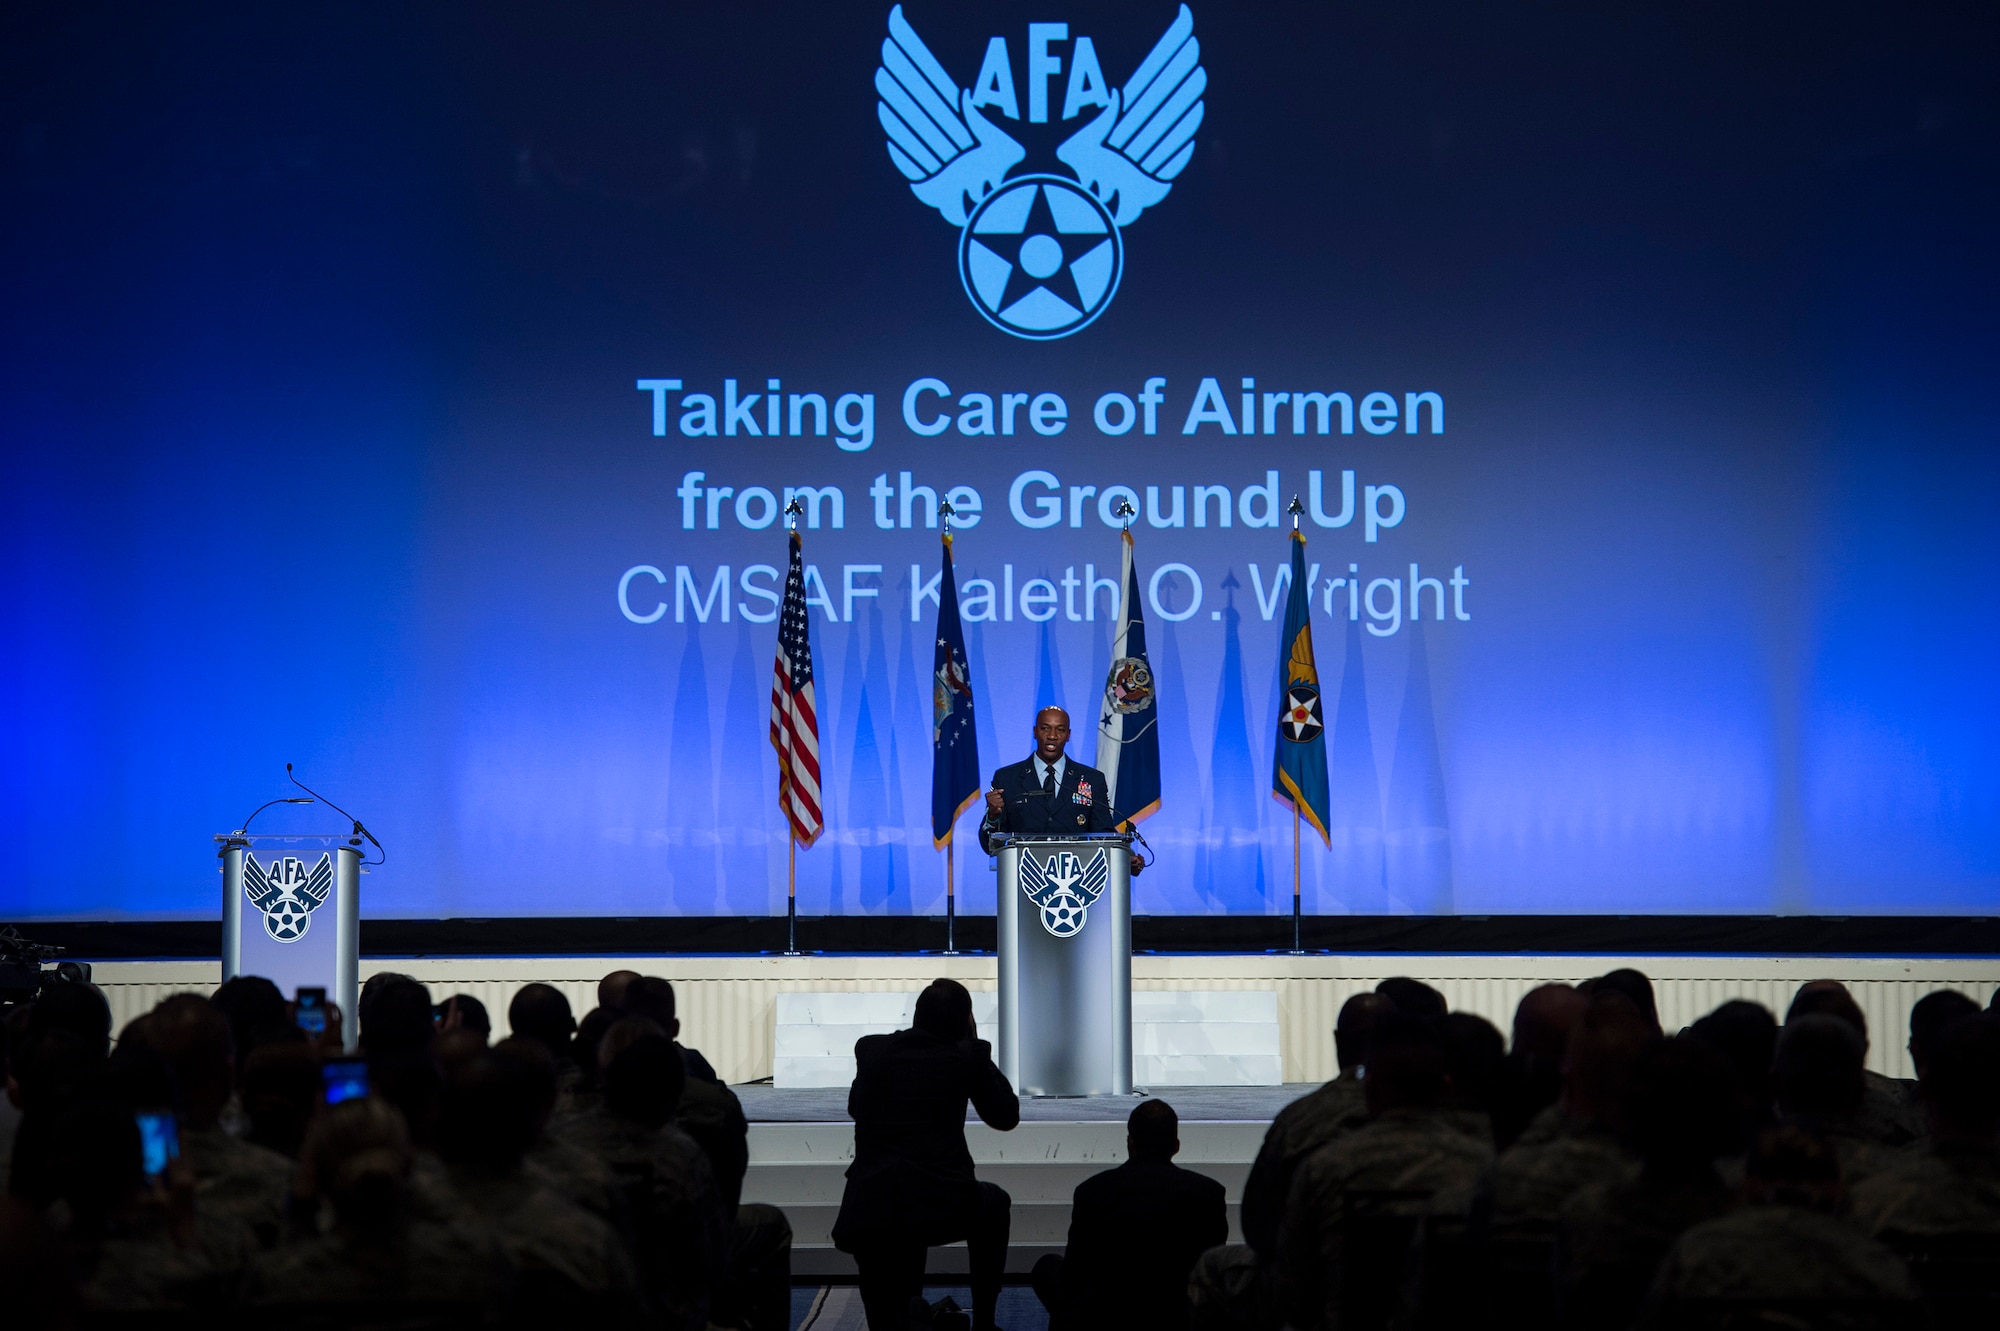 Chief Master Sgt. of the Air Force Kaleth O. Wright speaks on resiliency during the Air Force Association's Air, Space and Cyber Conference in National Harbor, Md., Sept. 19, 2018. During his speech, Wright spoke about the importance of taking care of yourself and each other. (U.S. Air Force photo by Tech. Sgt. DeAndre Curtiss)